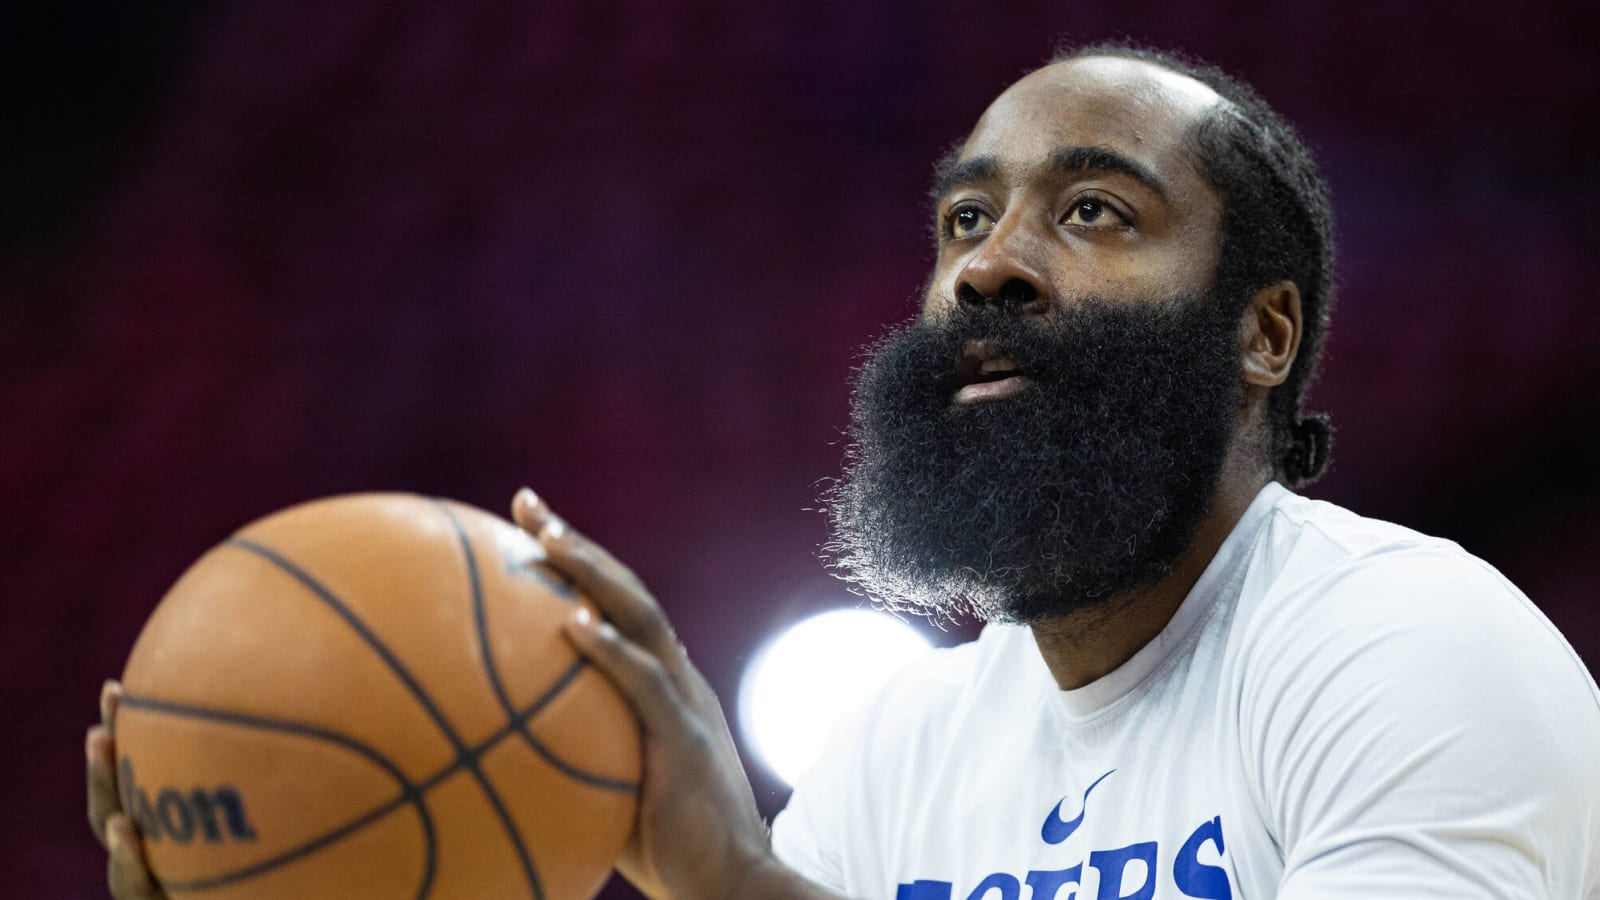 Report: James Harden has ‘fractured’ relationship with 76ers